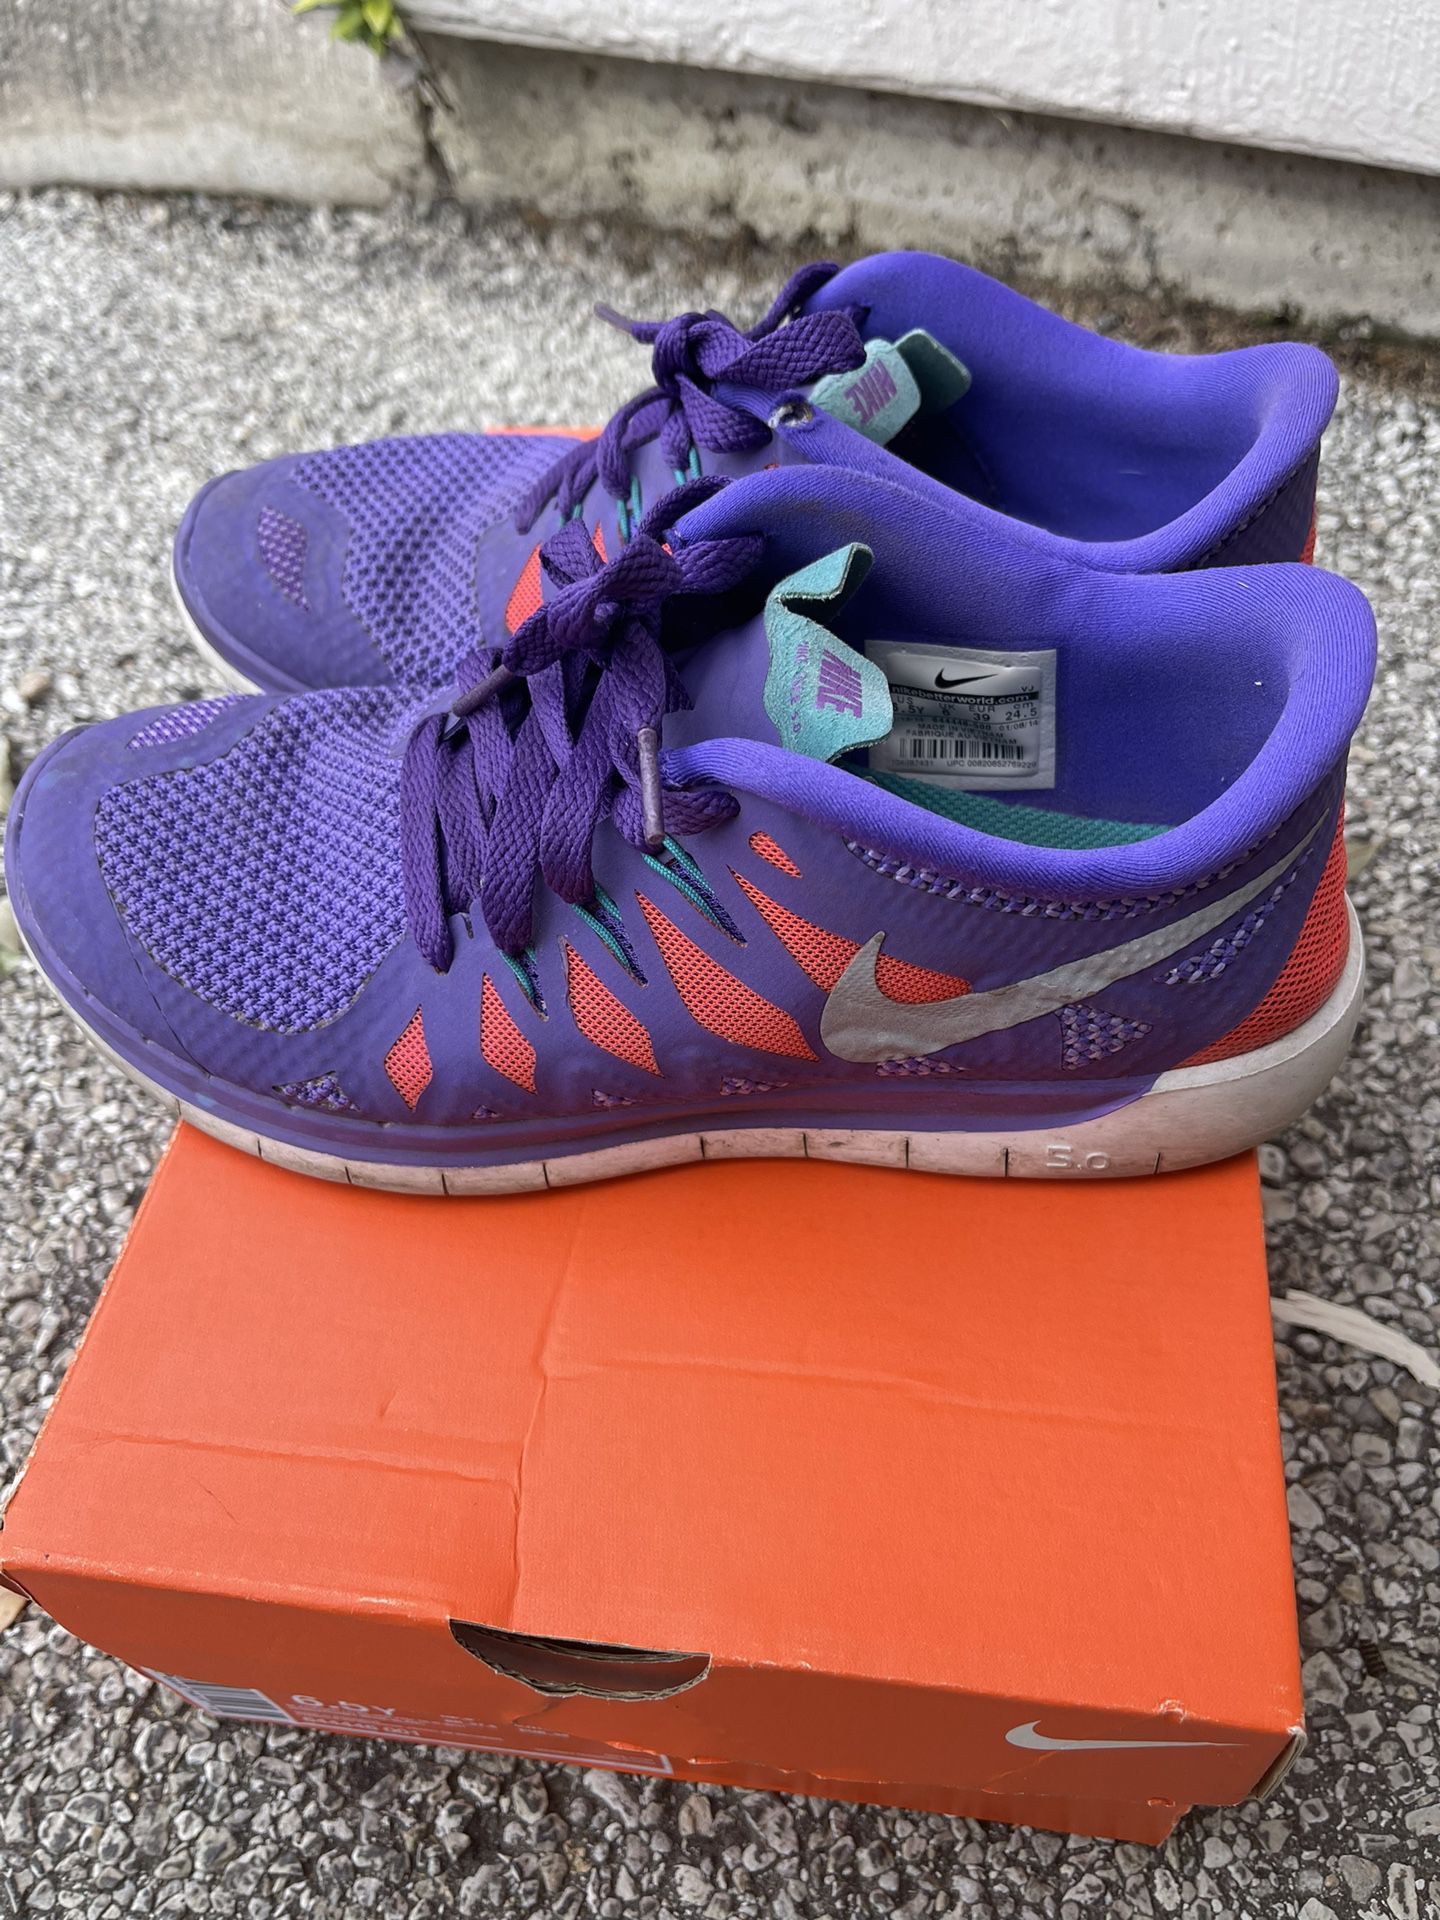 Foresee Regeneration Sammenbrud Youth Nike Free 5.0 (gs) for Sale in San Antonio, TX - OfferUp